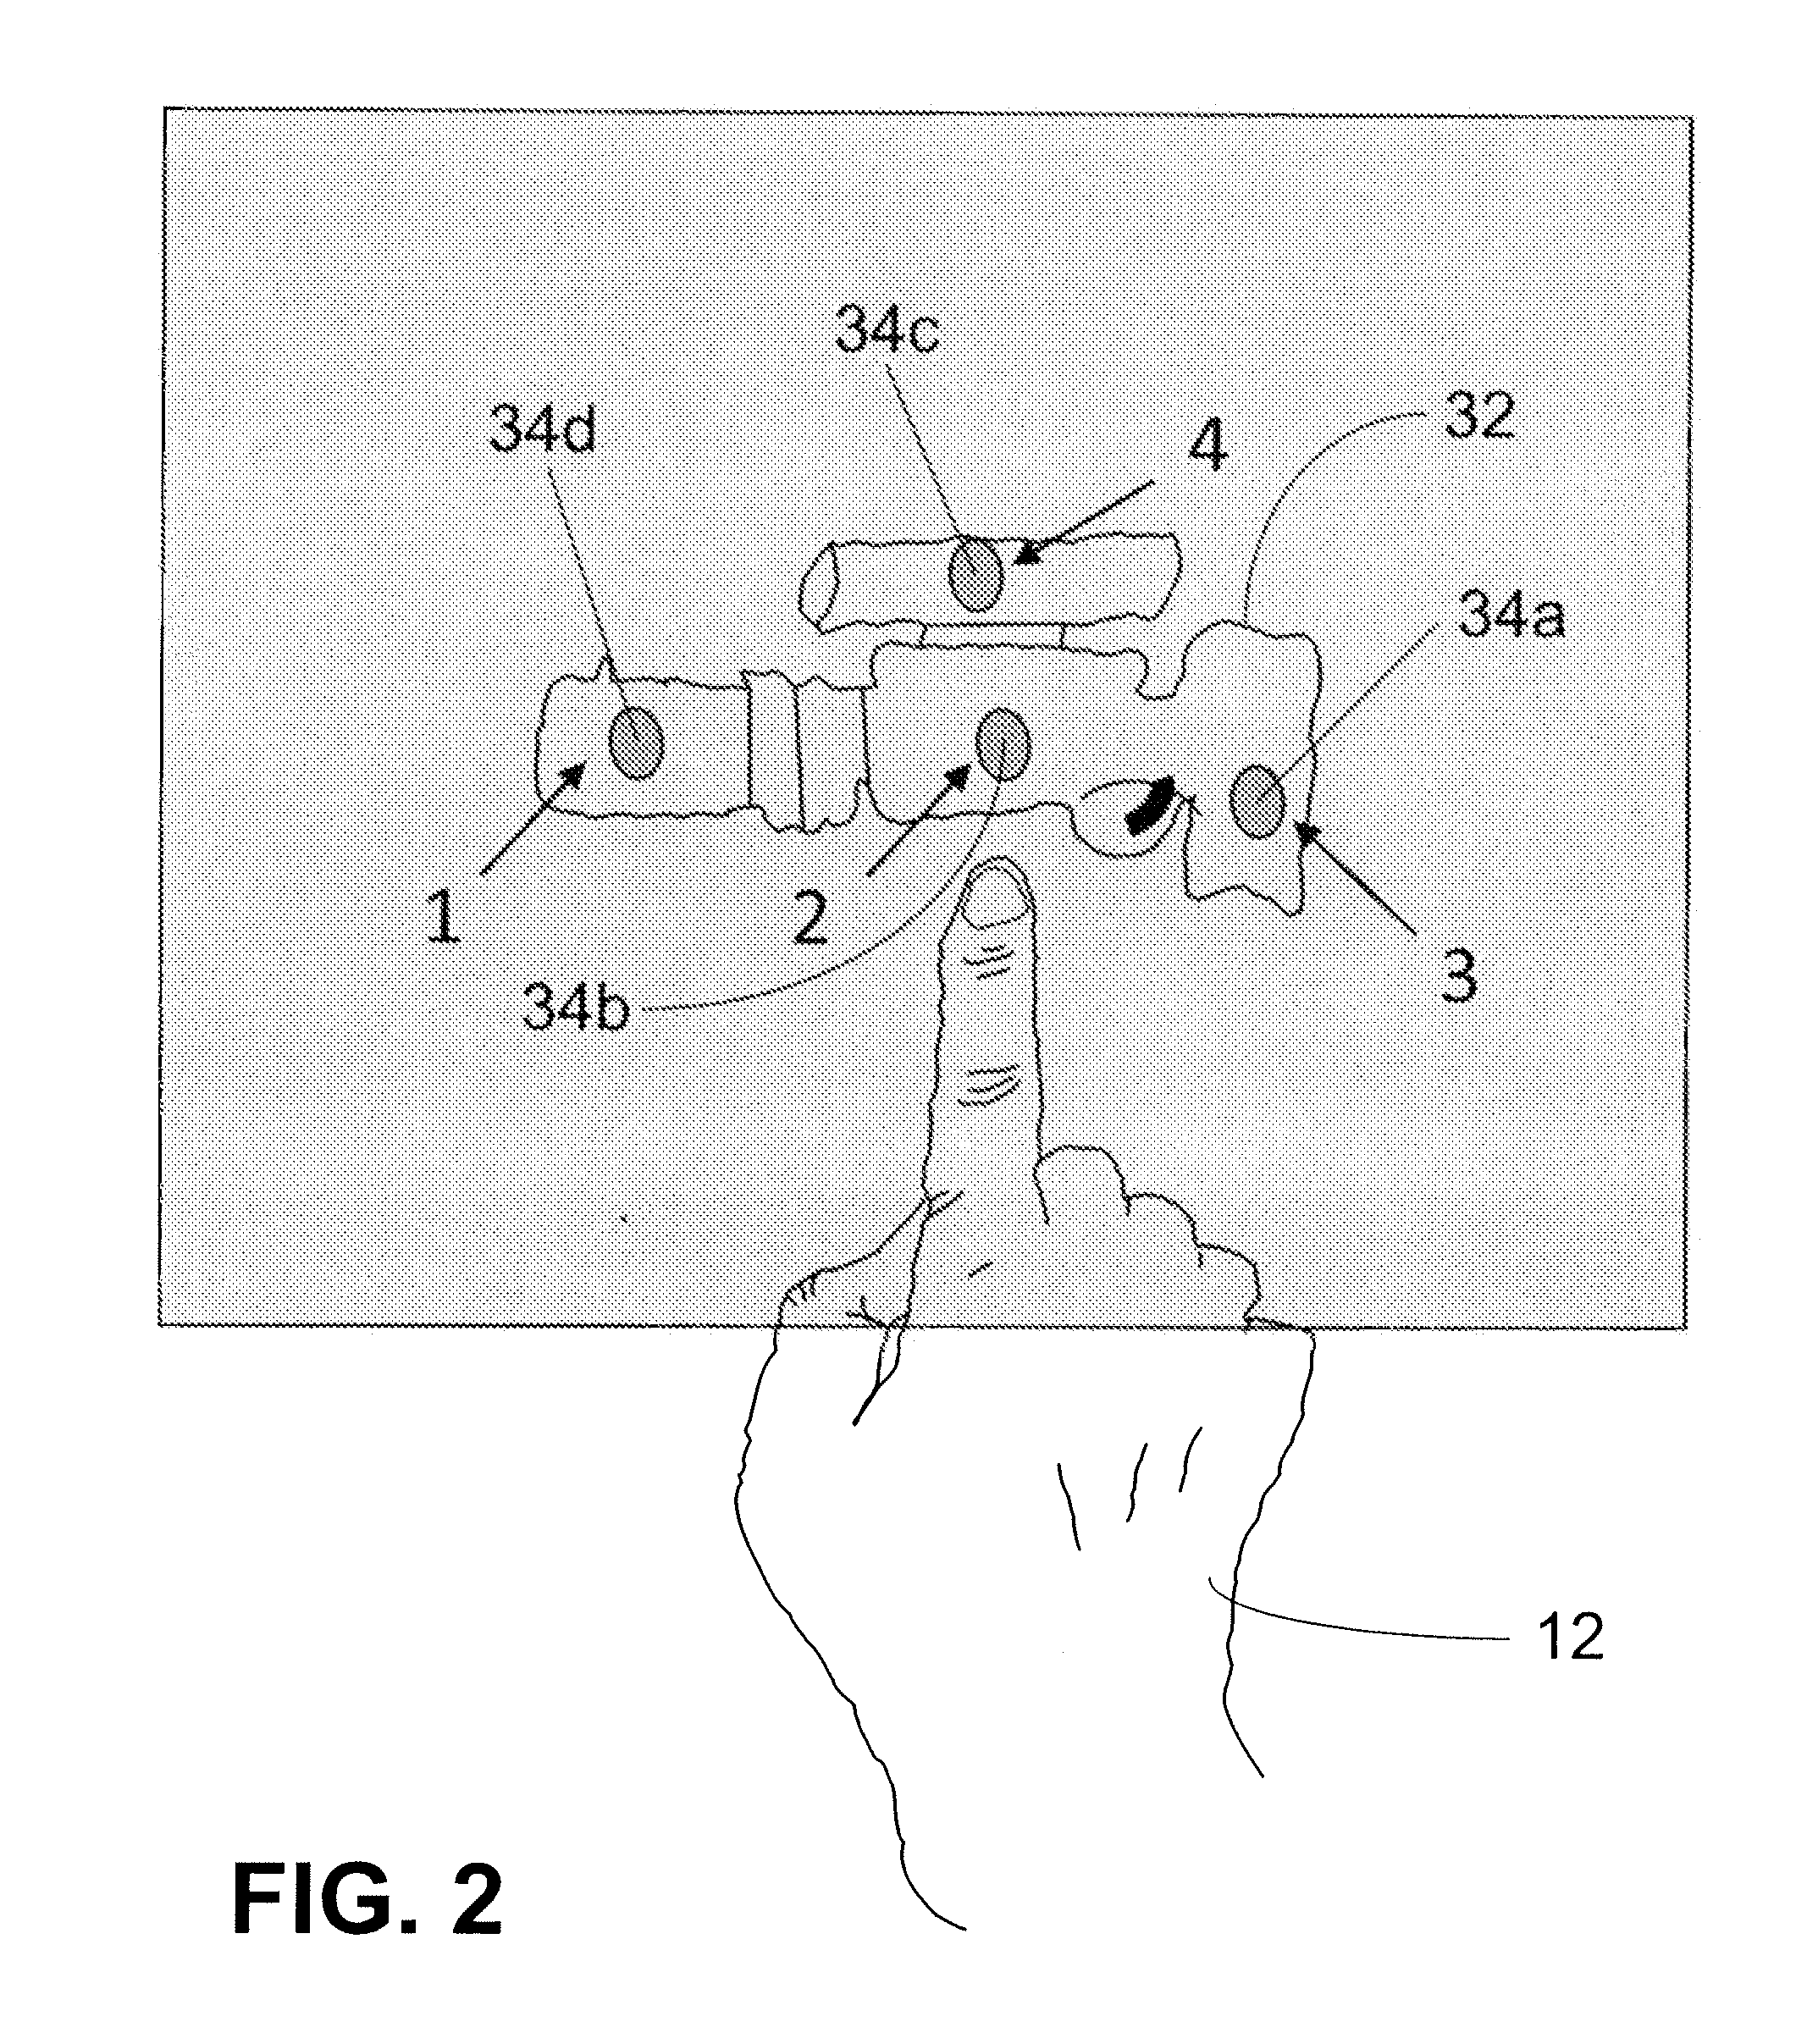 System and method for providing complex haptic stimulation during input of control gestures, and relating to control of virtual equipment